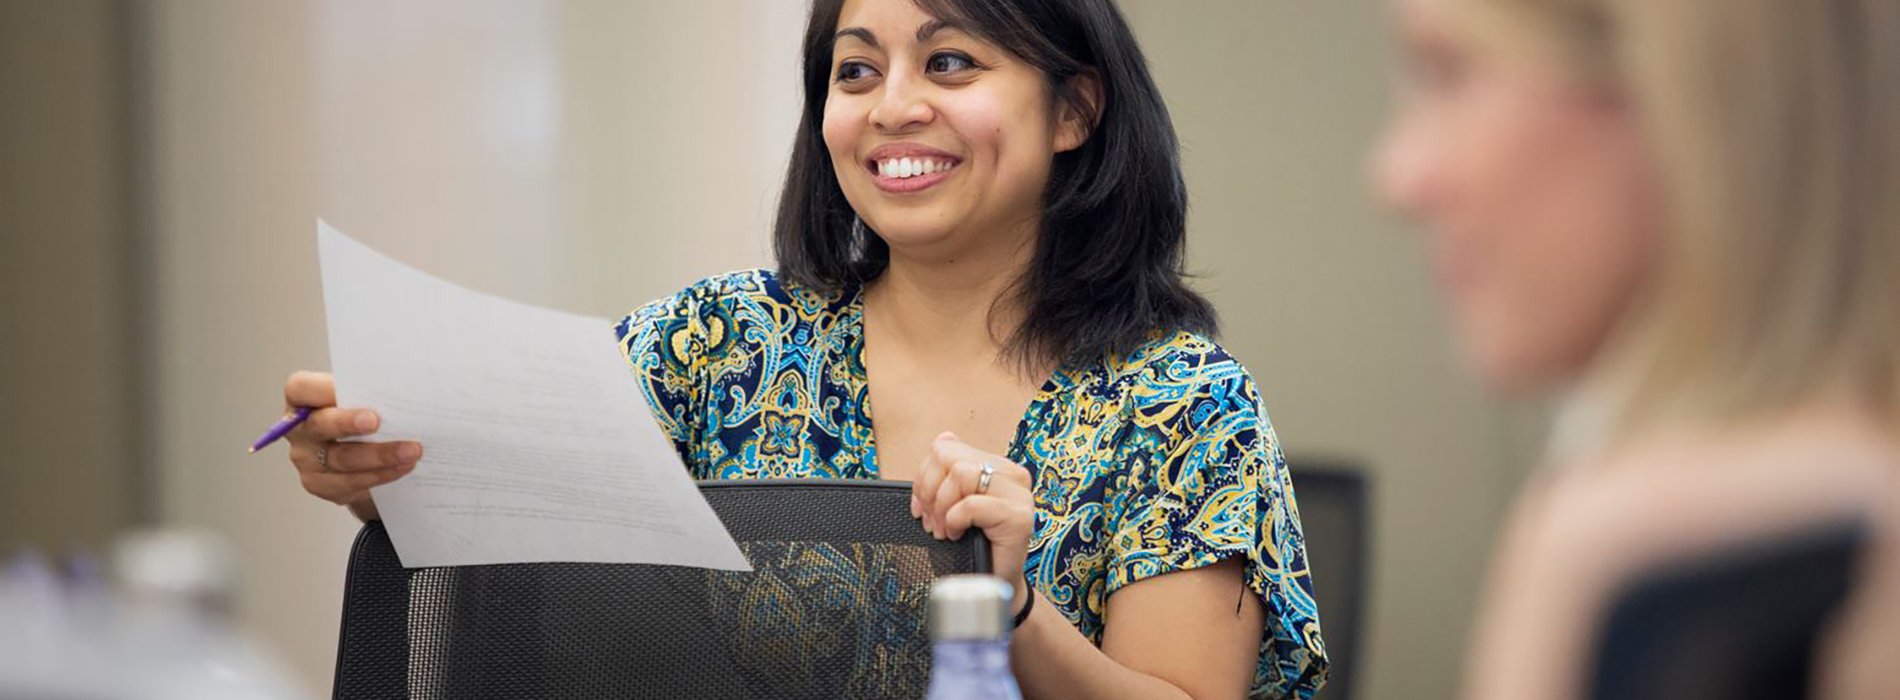 Woman smiling holding a paper in class.